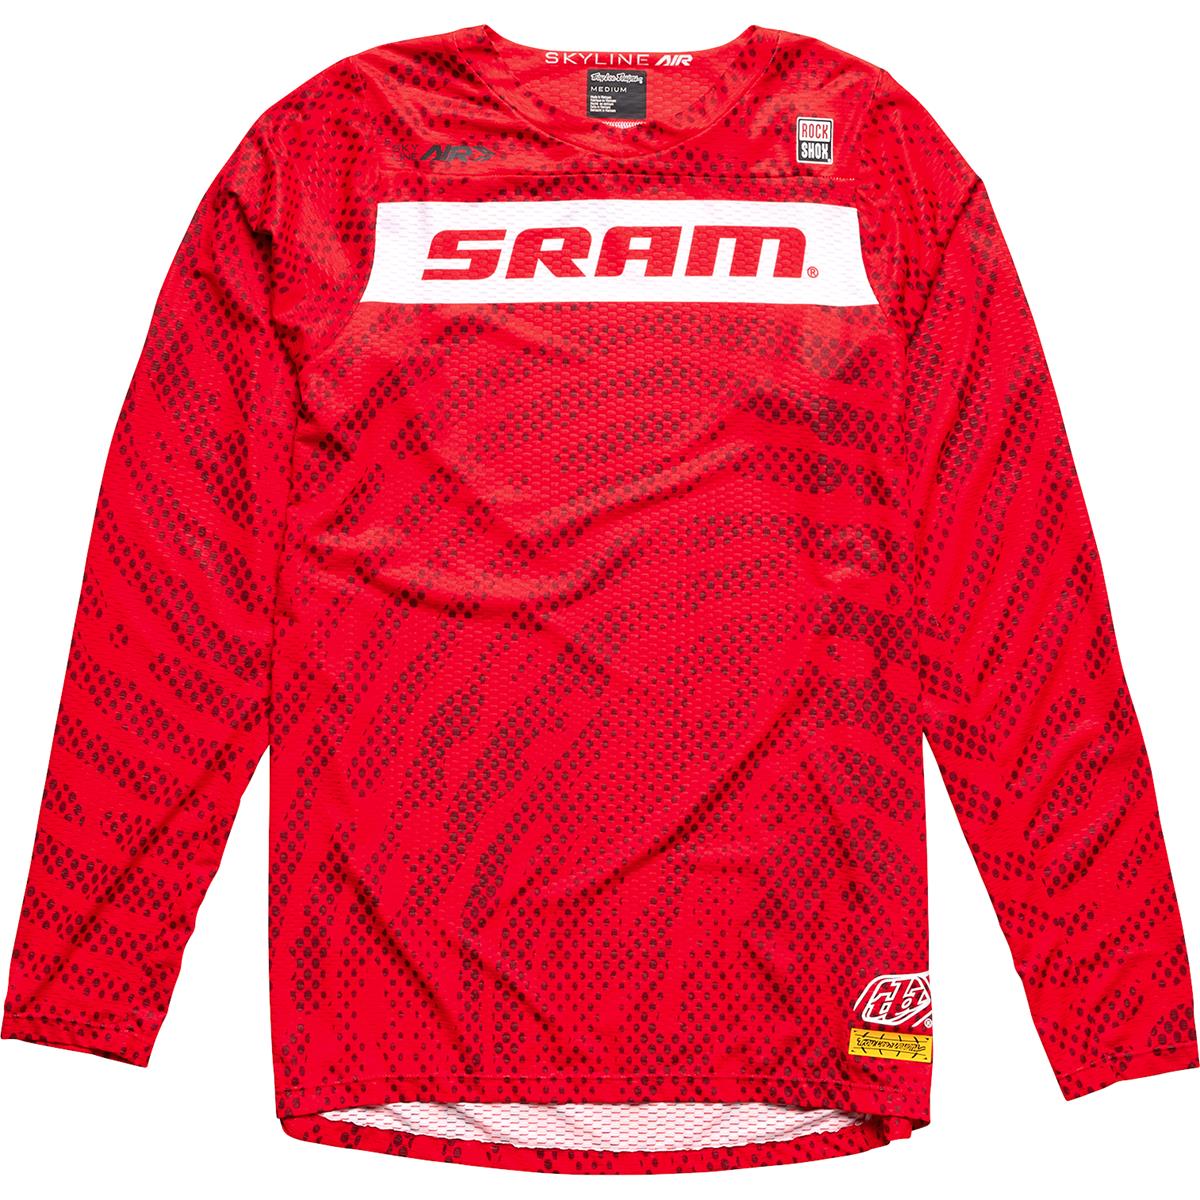 Troy Lee Designs Maillot VTT manches longues Skyline Air Sram - Roots Fiery Red